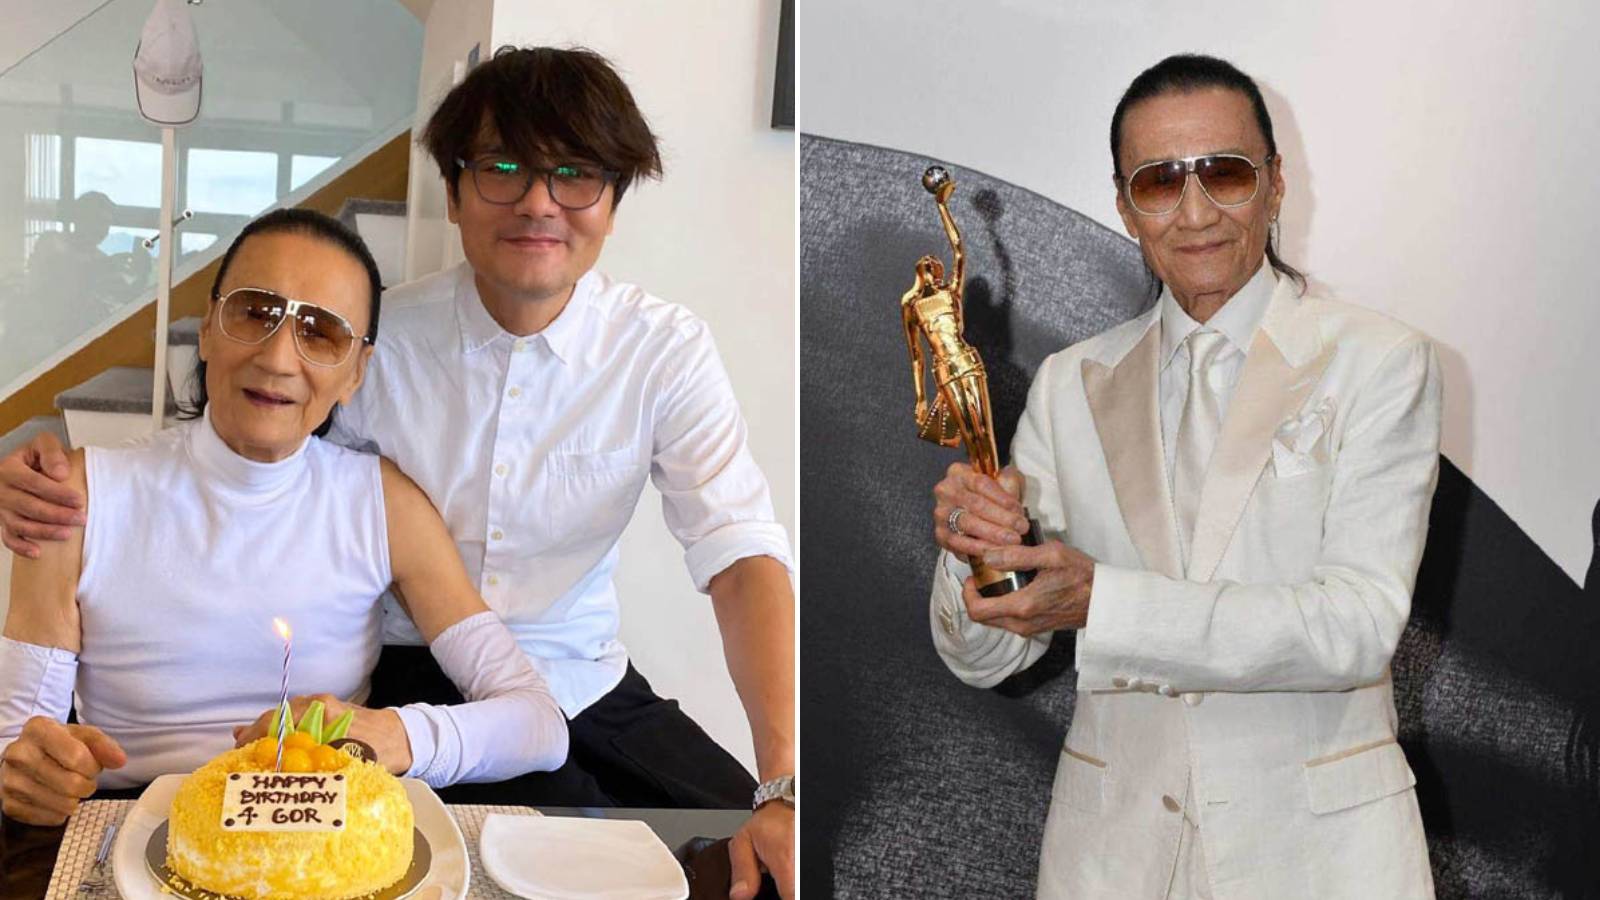 New Photo Of Patrick Tse On His 84th Birthday Reignites Speculation About His Health